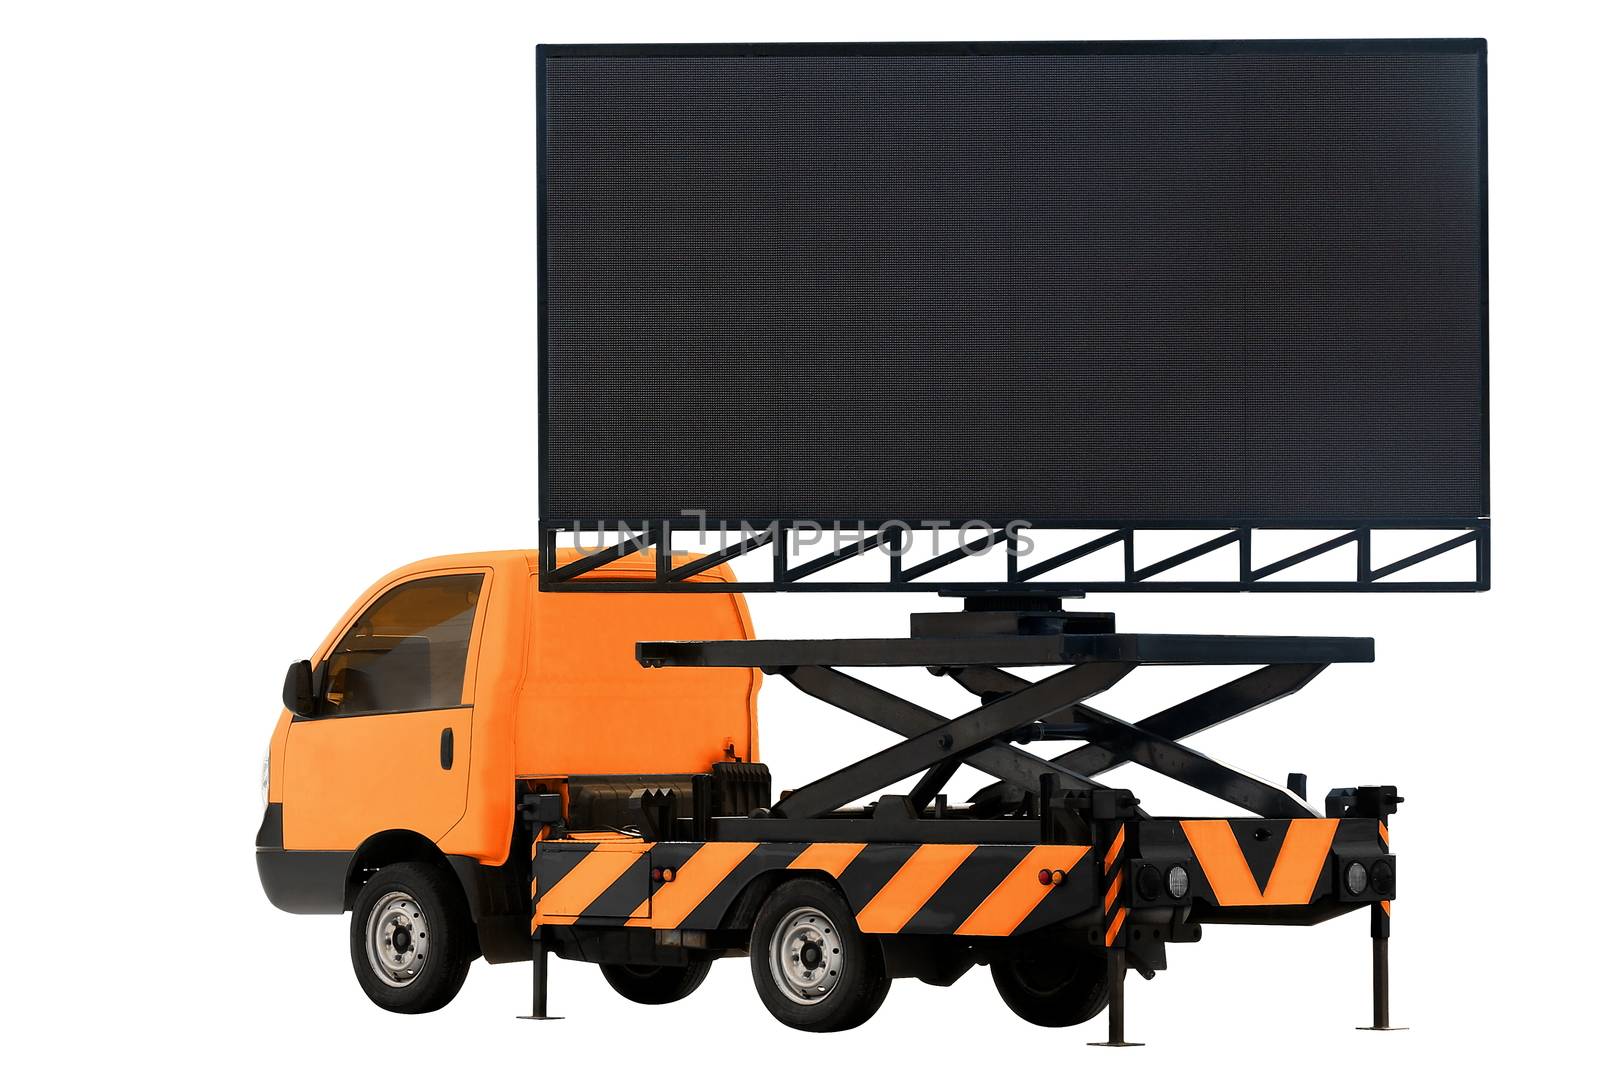 Billboard on car orange color LED panel for sign Advertising isolated on background white